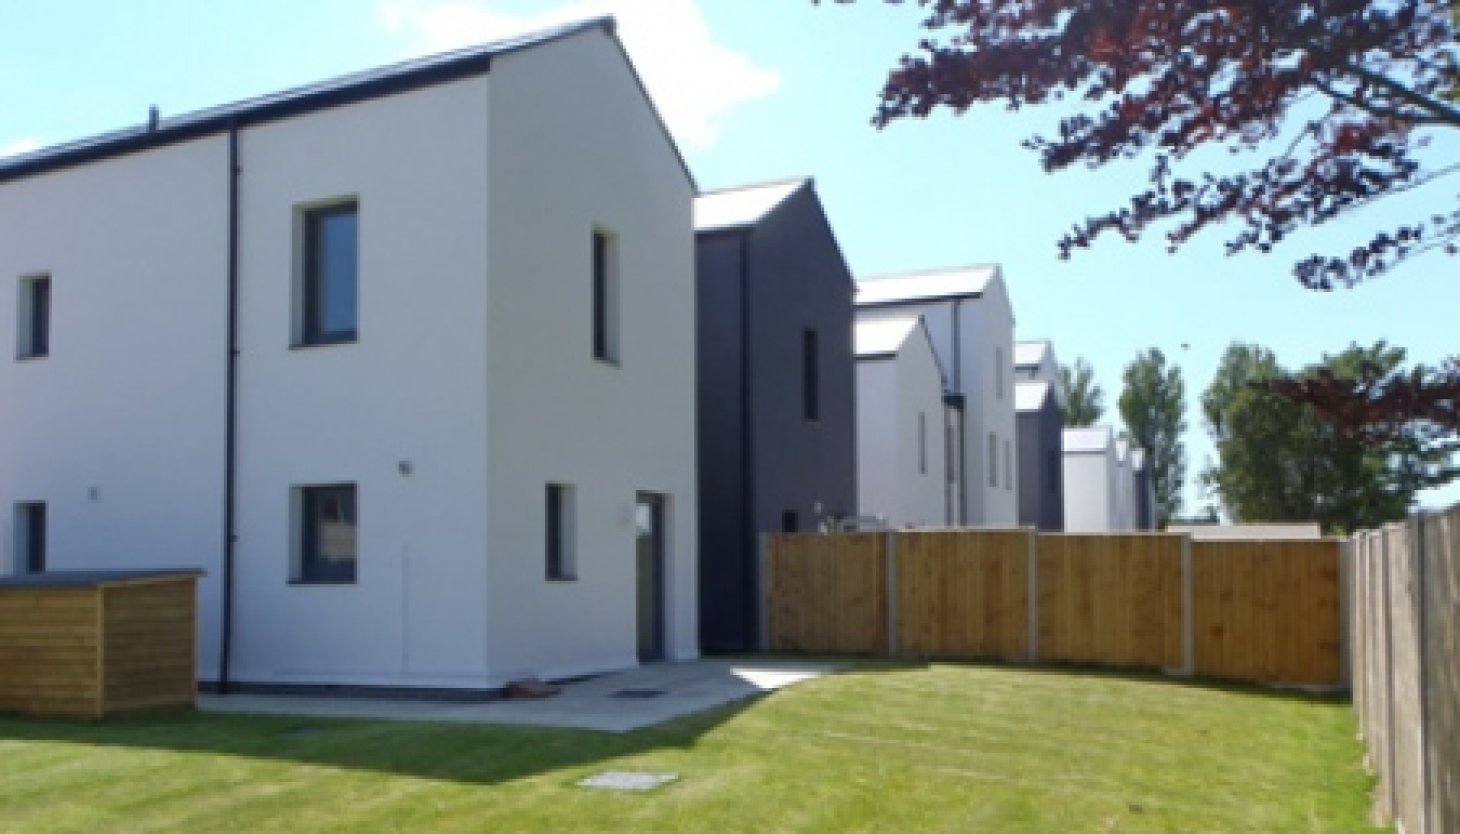 Celcon Plus Blocks and Thin-Joint used in Passivhaus Development